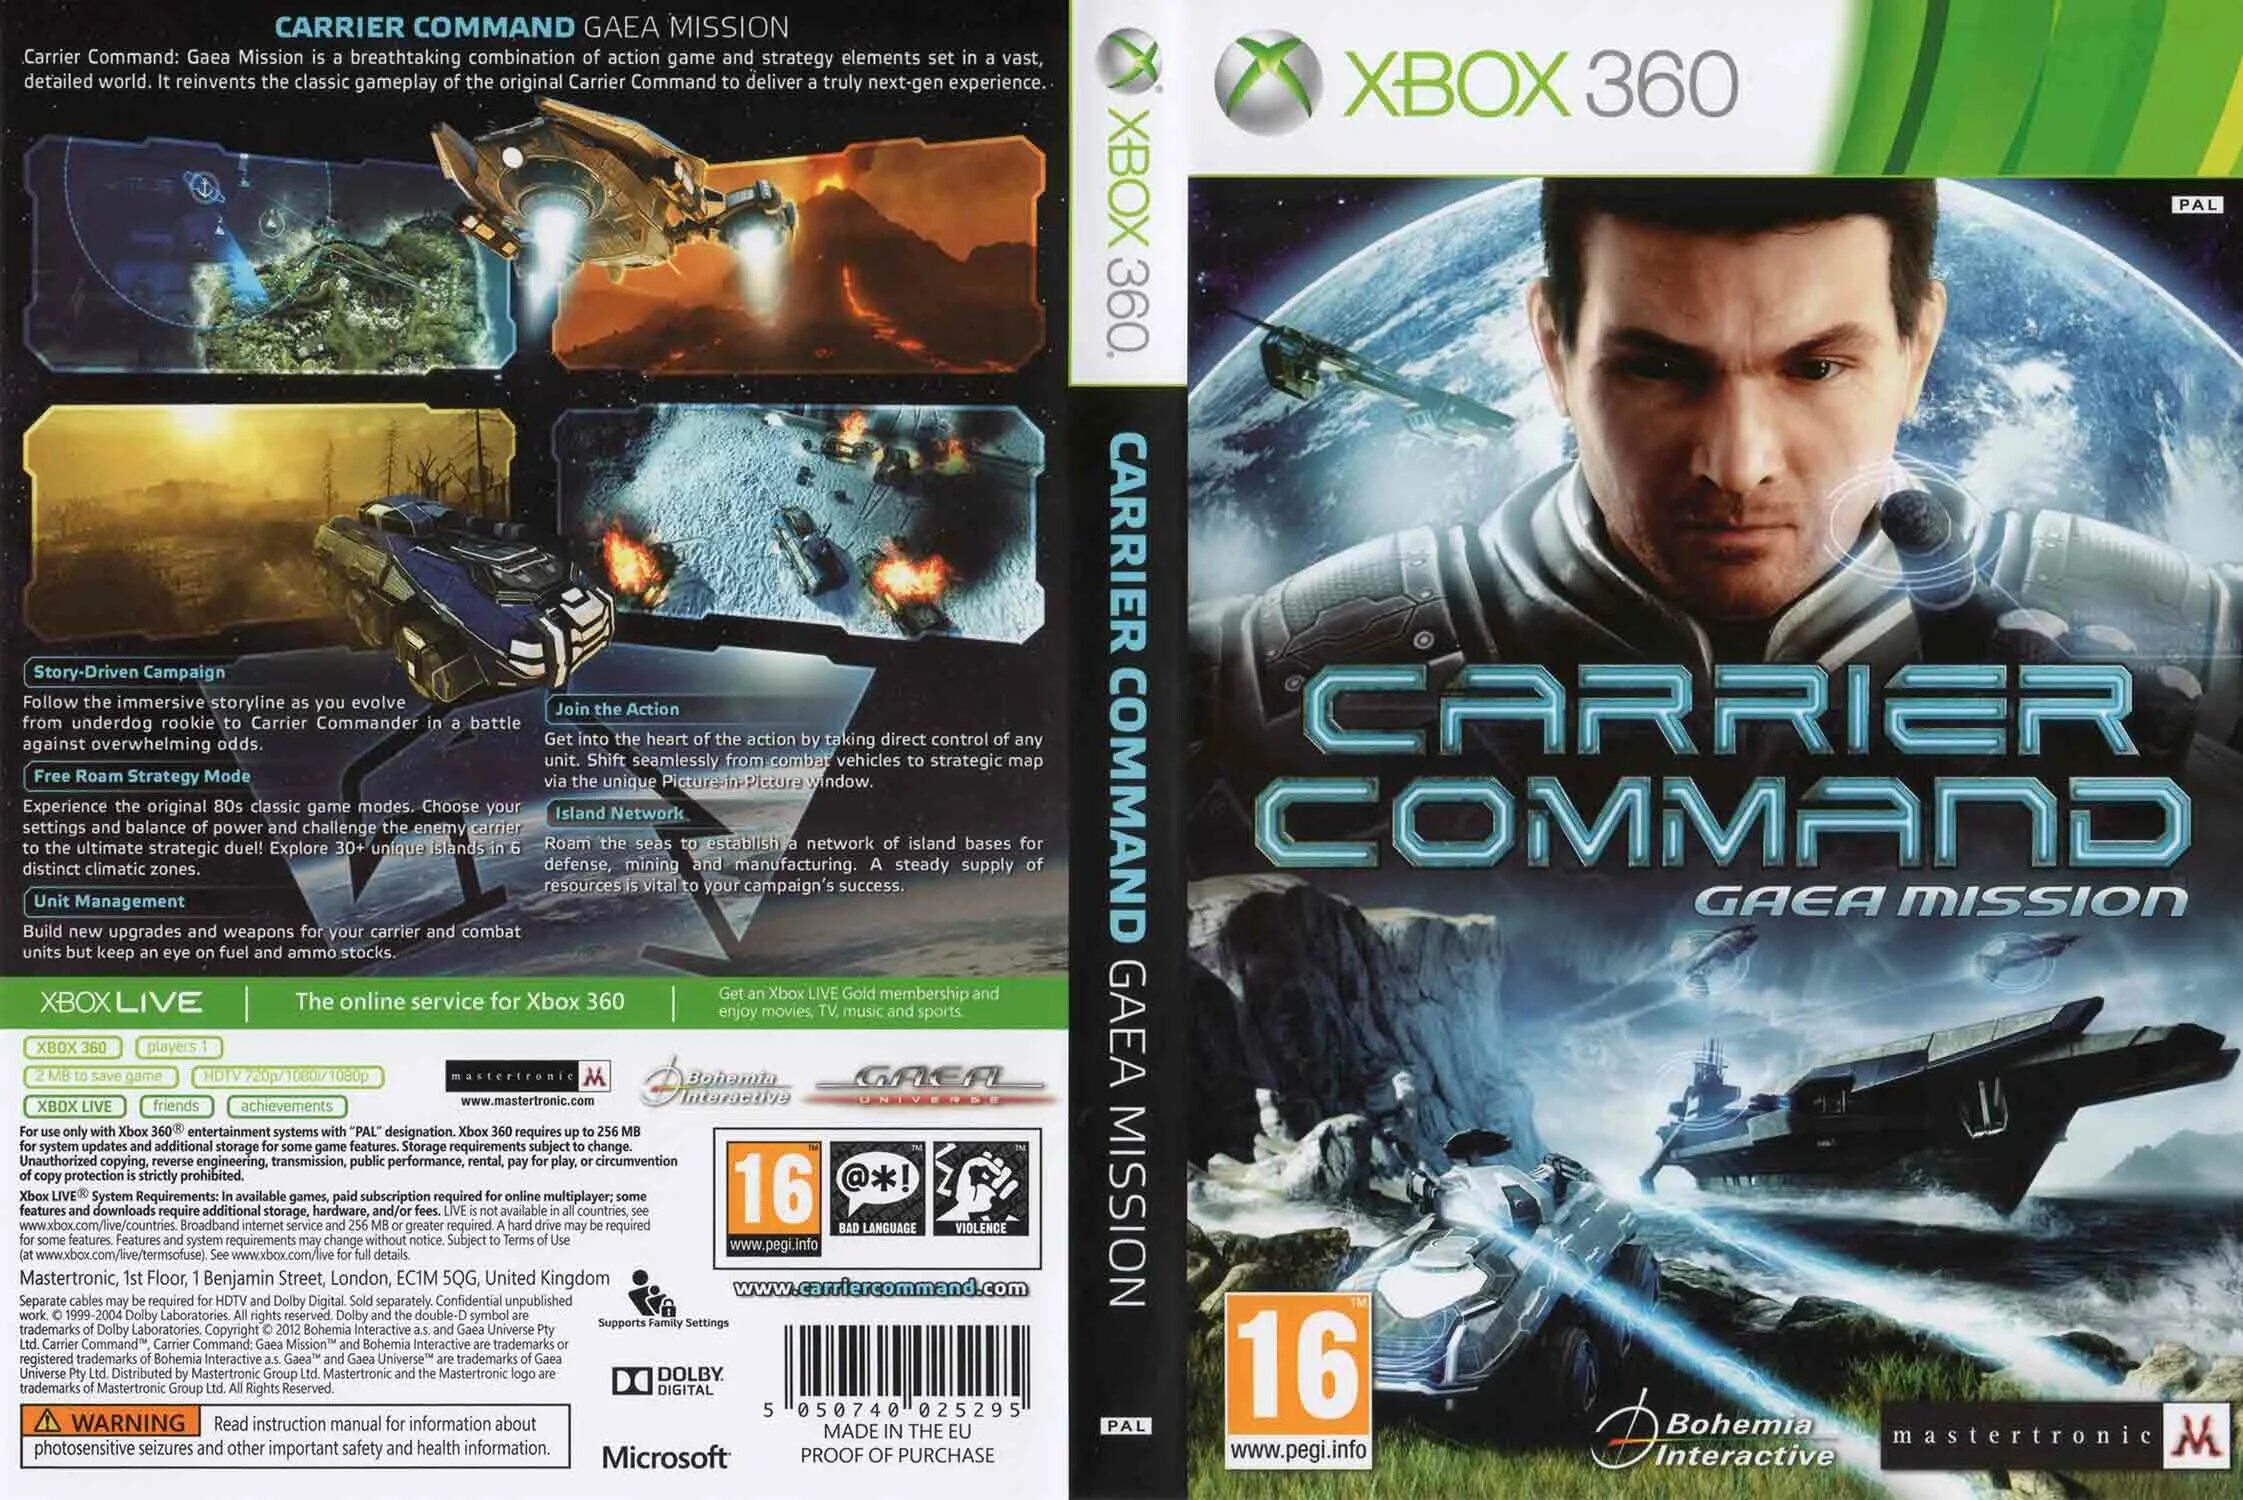 Carrier Command Gaea Mission Xbox 360. Carrier Command: Gaea Mission (2012). Carrier Command Gaea Mission. Carrier Command: Gaea Mission Cover game. Mission command